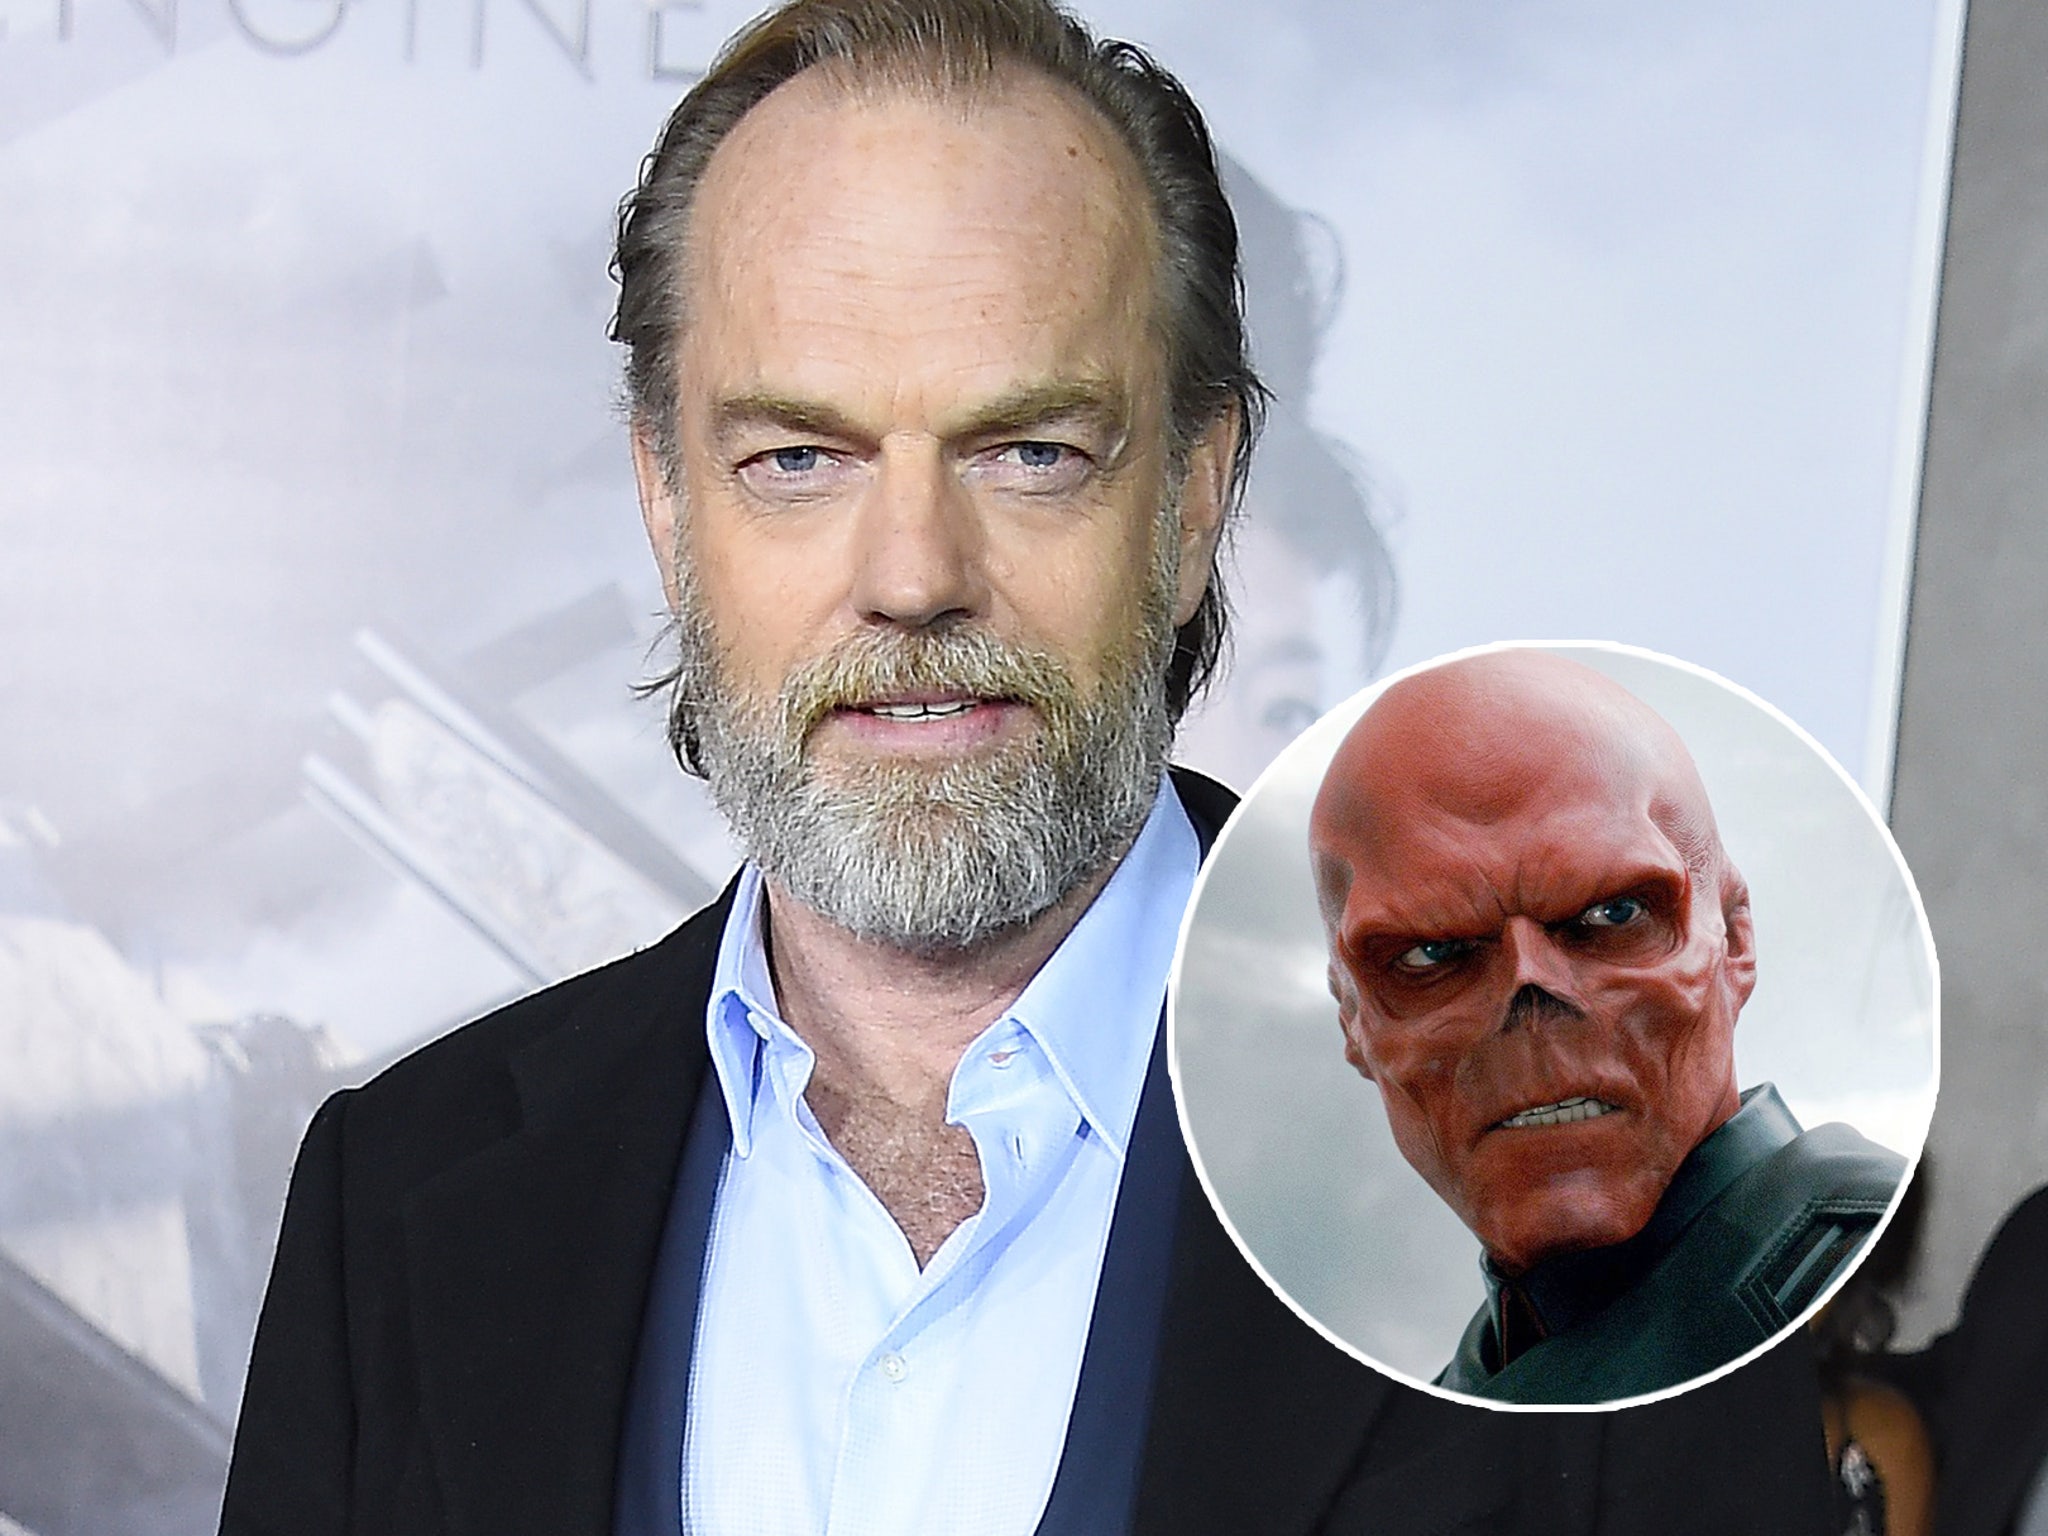 Hugo Weaving Doesn't Want To Play Red Skull Again In Any More Marvel Movies  – IndieWire